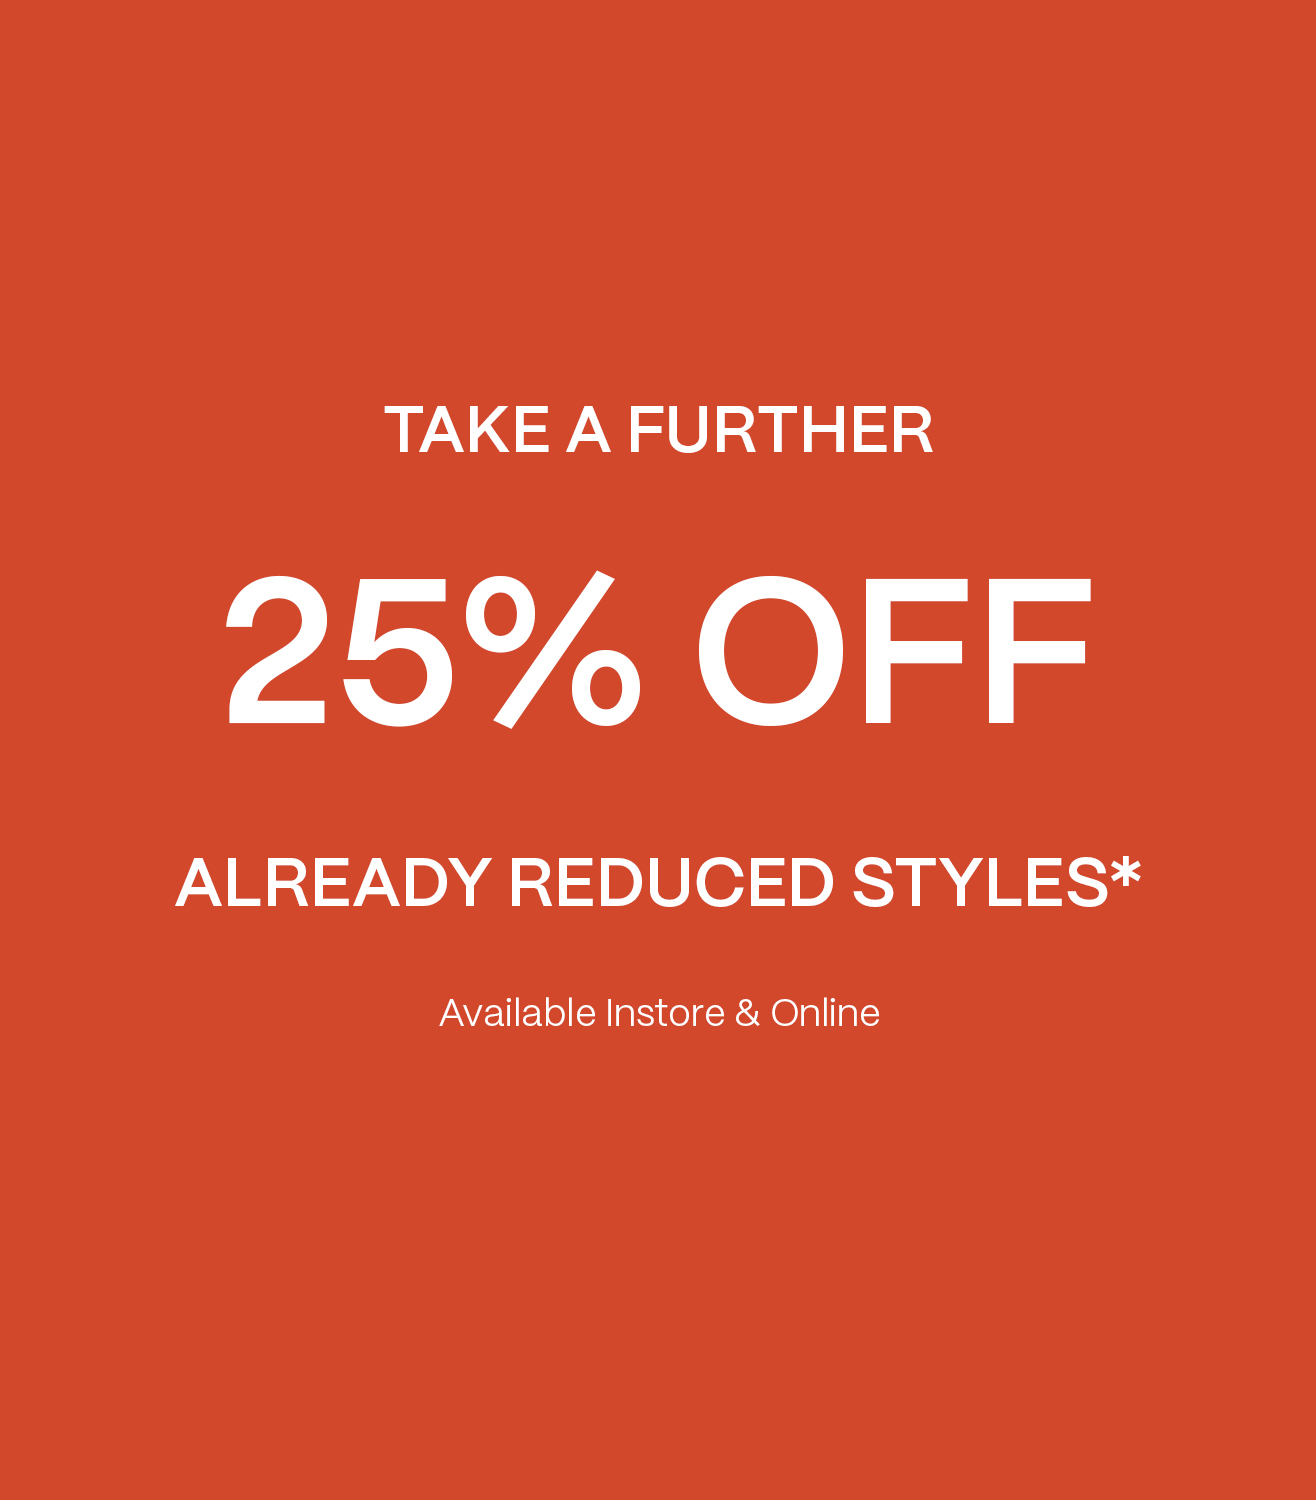 Take a further 25% off already reduced styles*. Shop Now.